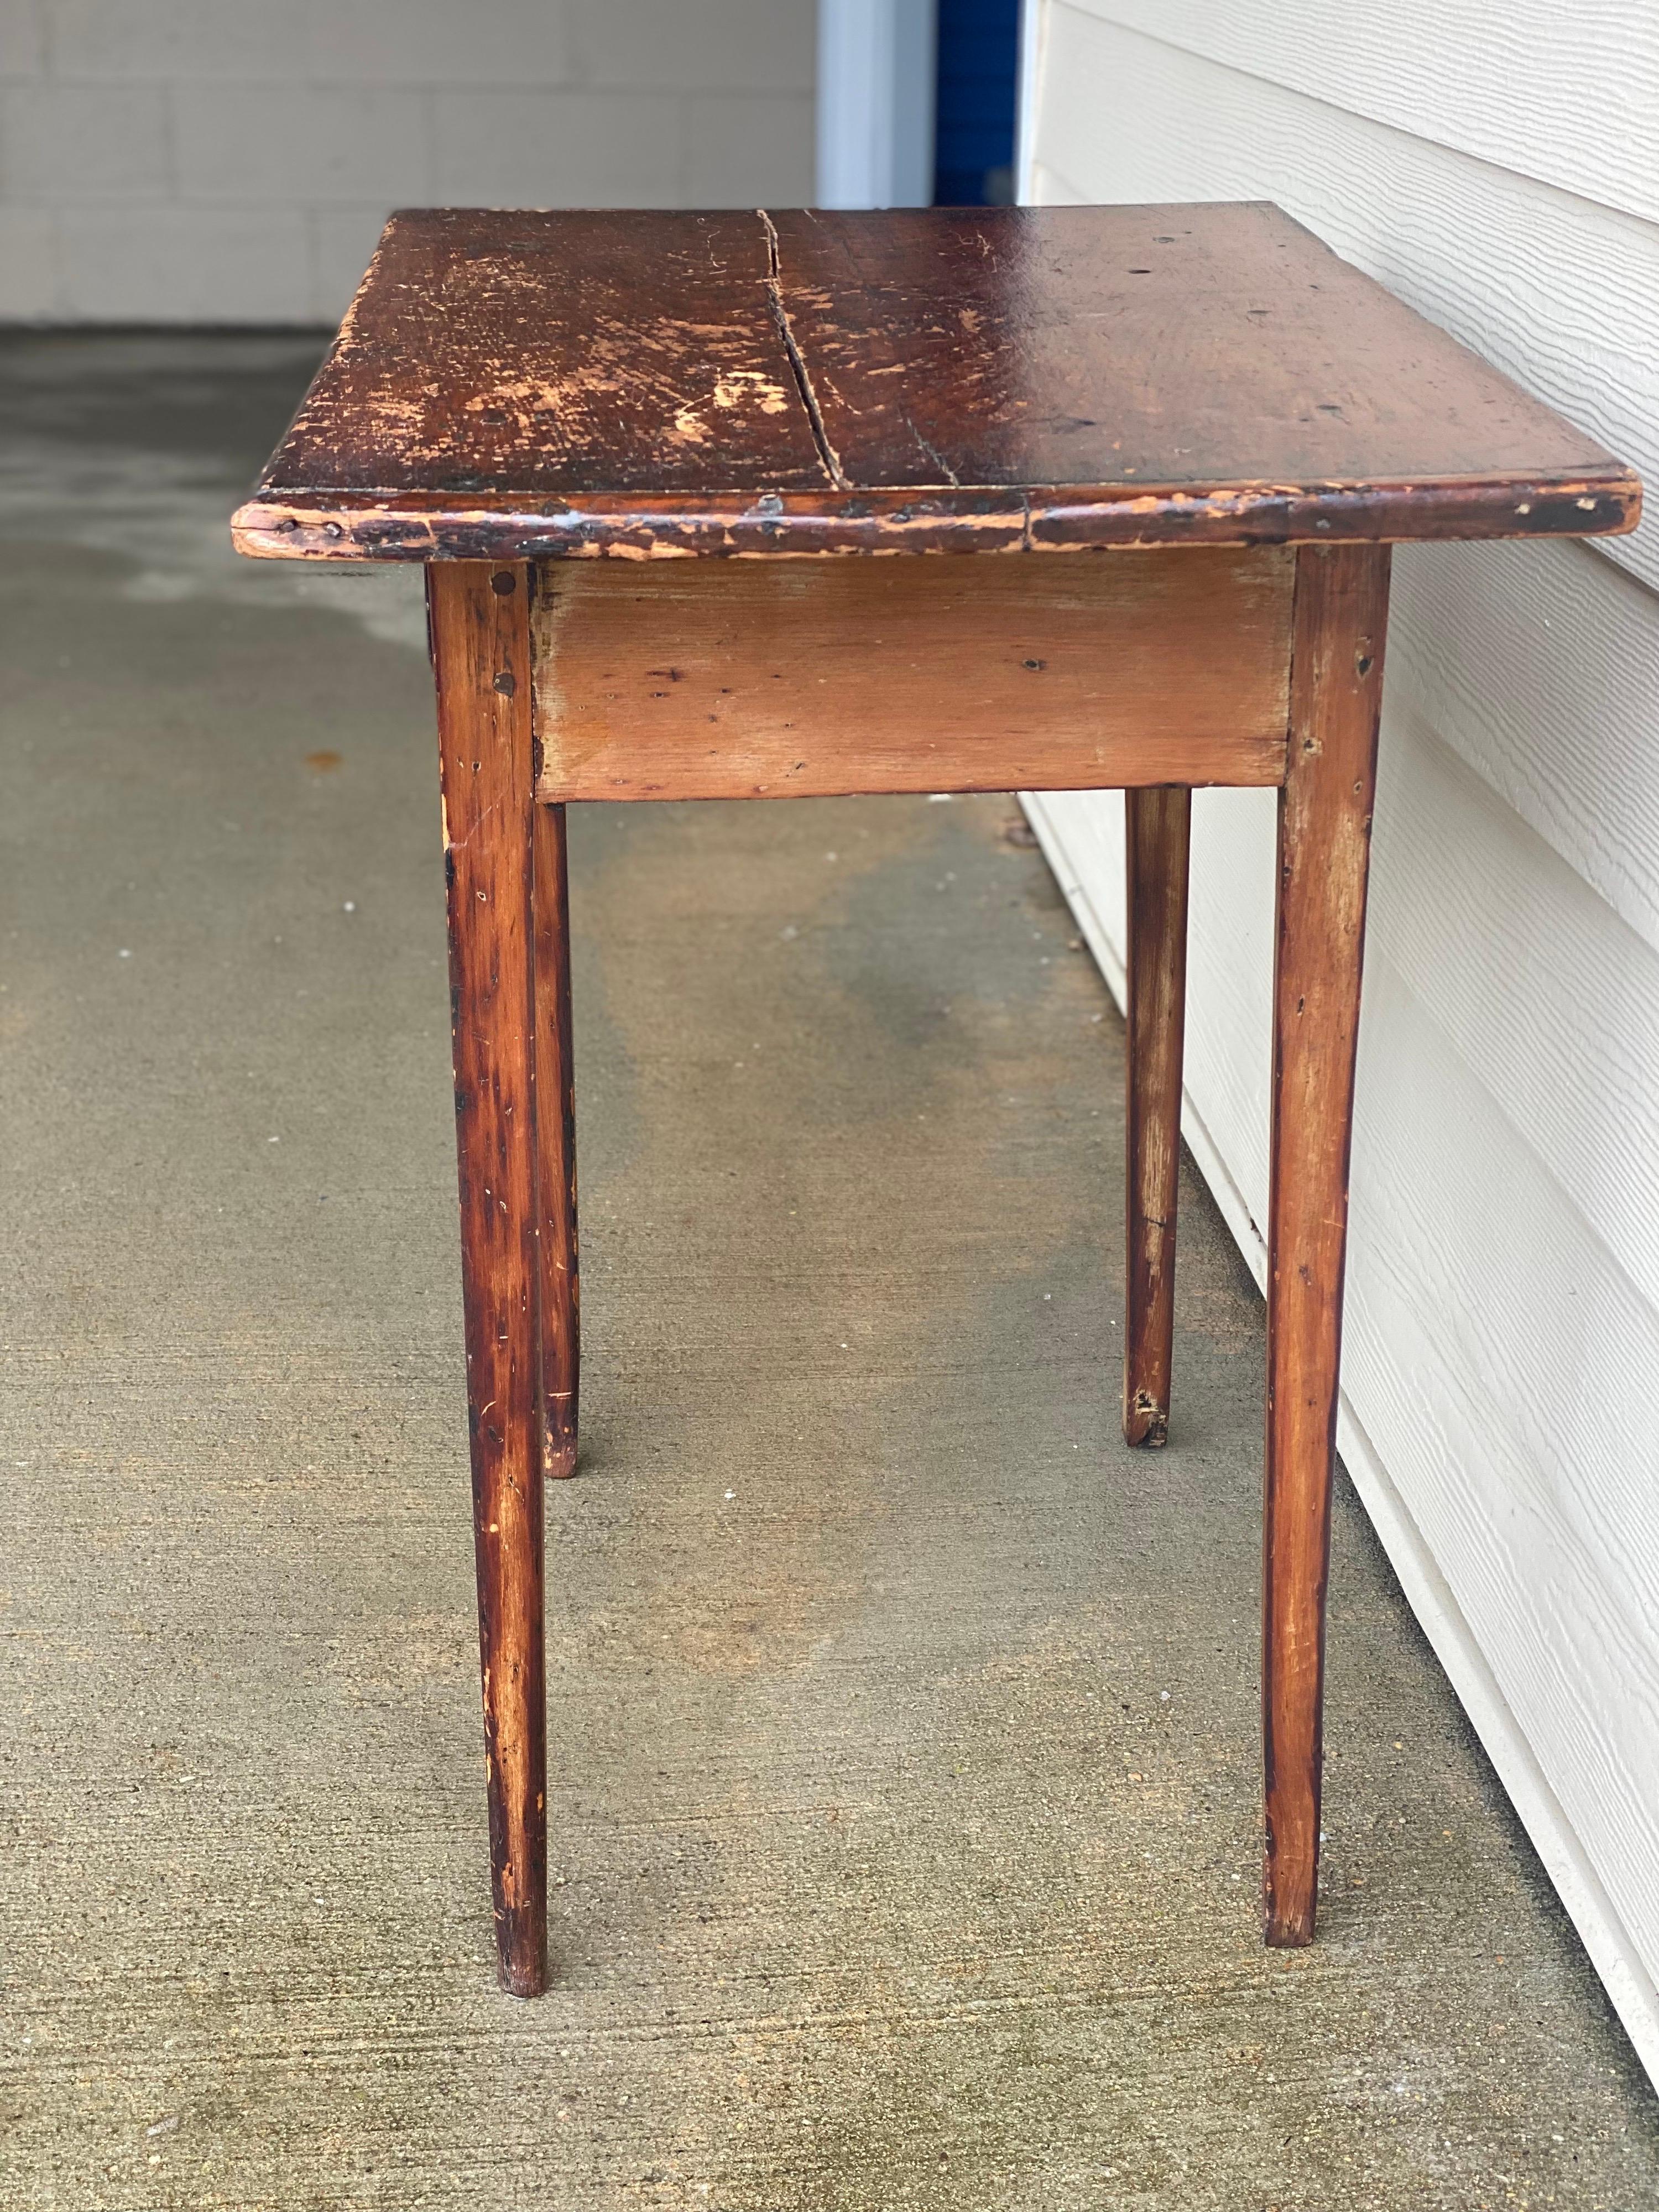 American single drawer rustic end table, 20th century.
Charming simple rustic table with clean lines, tapered legs, and a round brass knob. Some separation to the top. Knicks and wear to the finish. Overall stable condition with a rustic patina.

